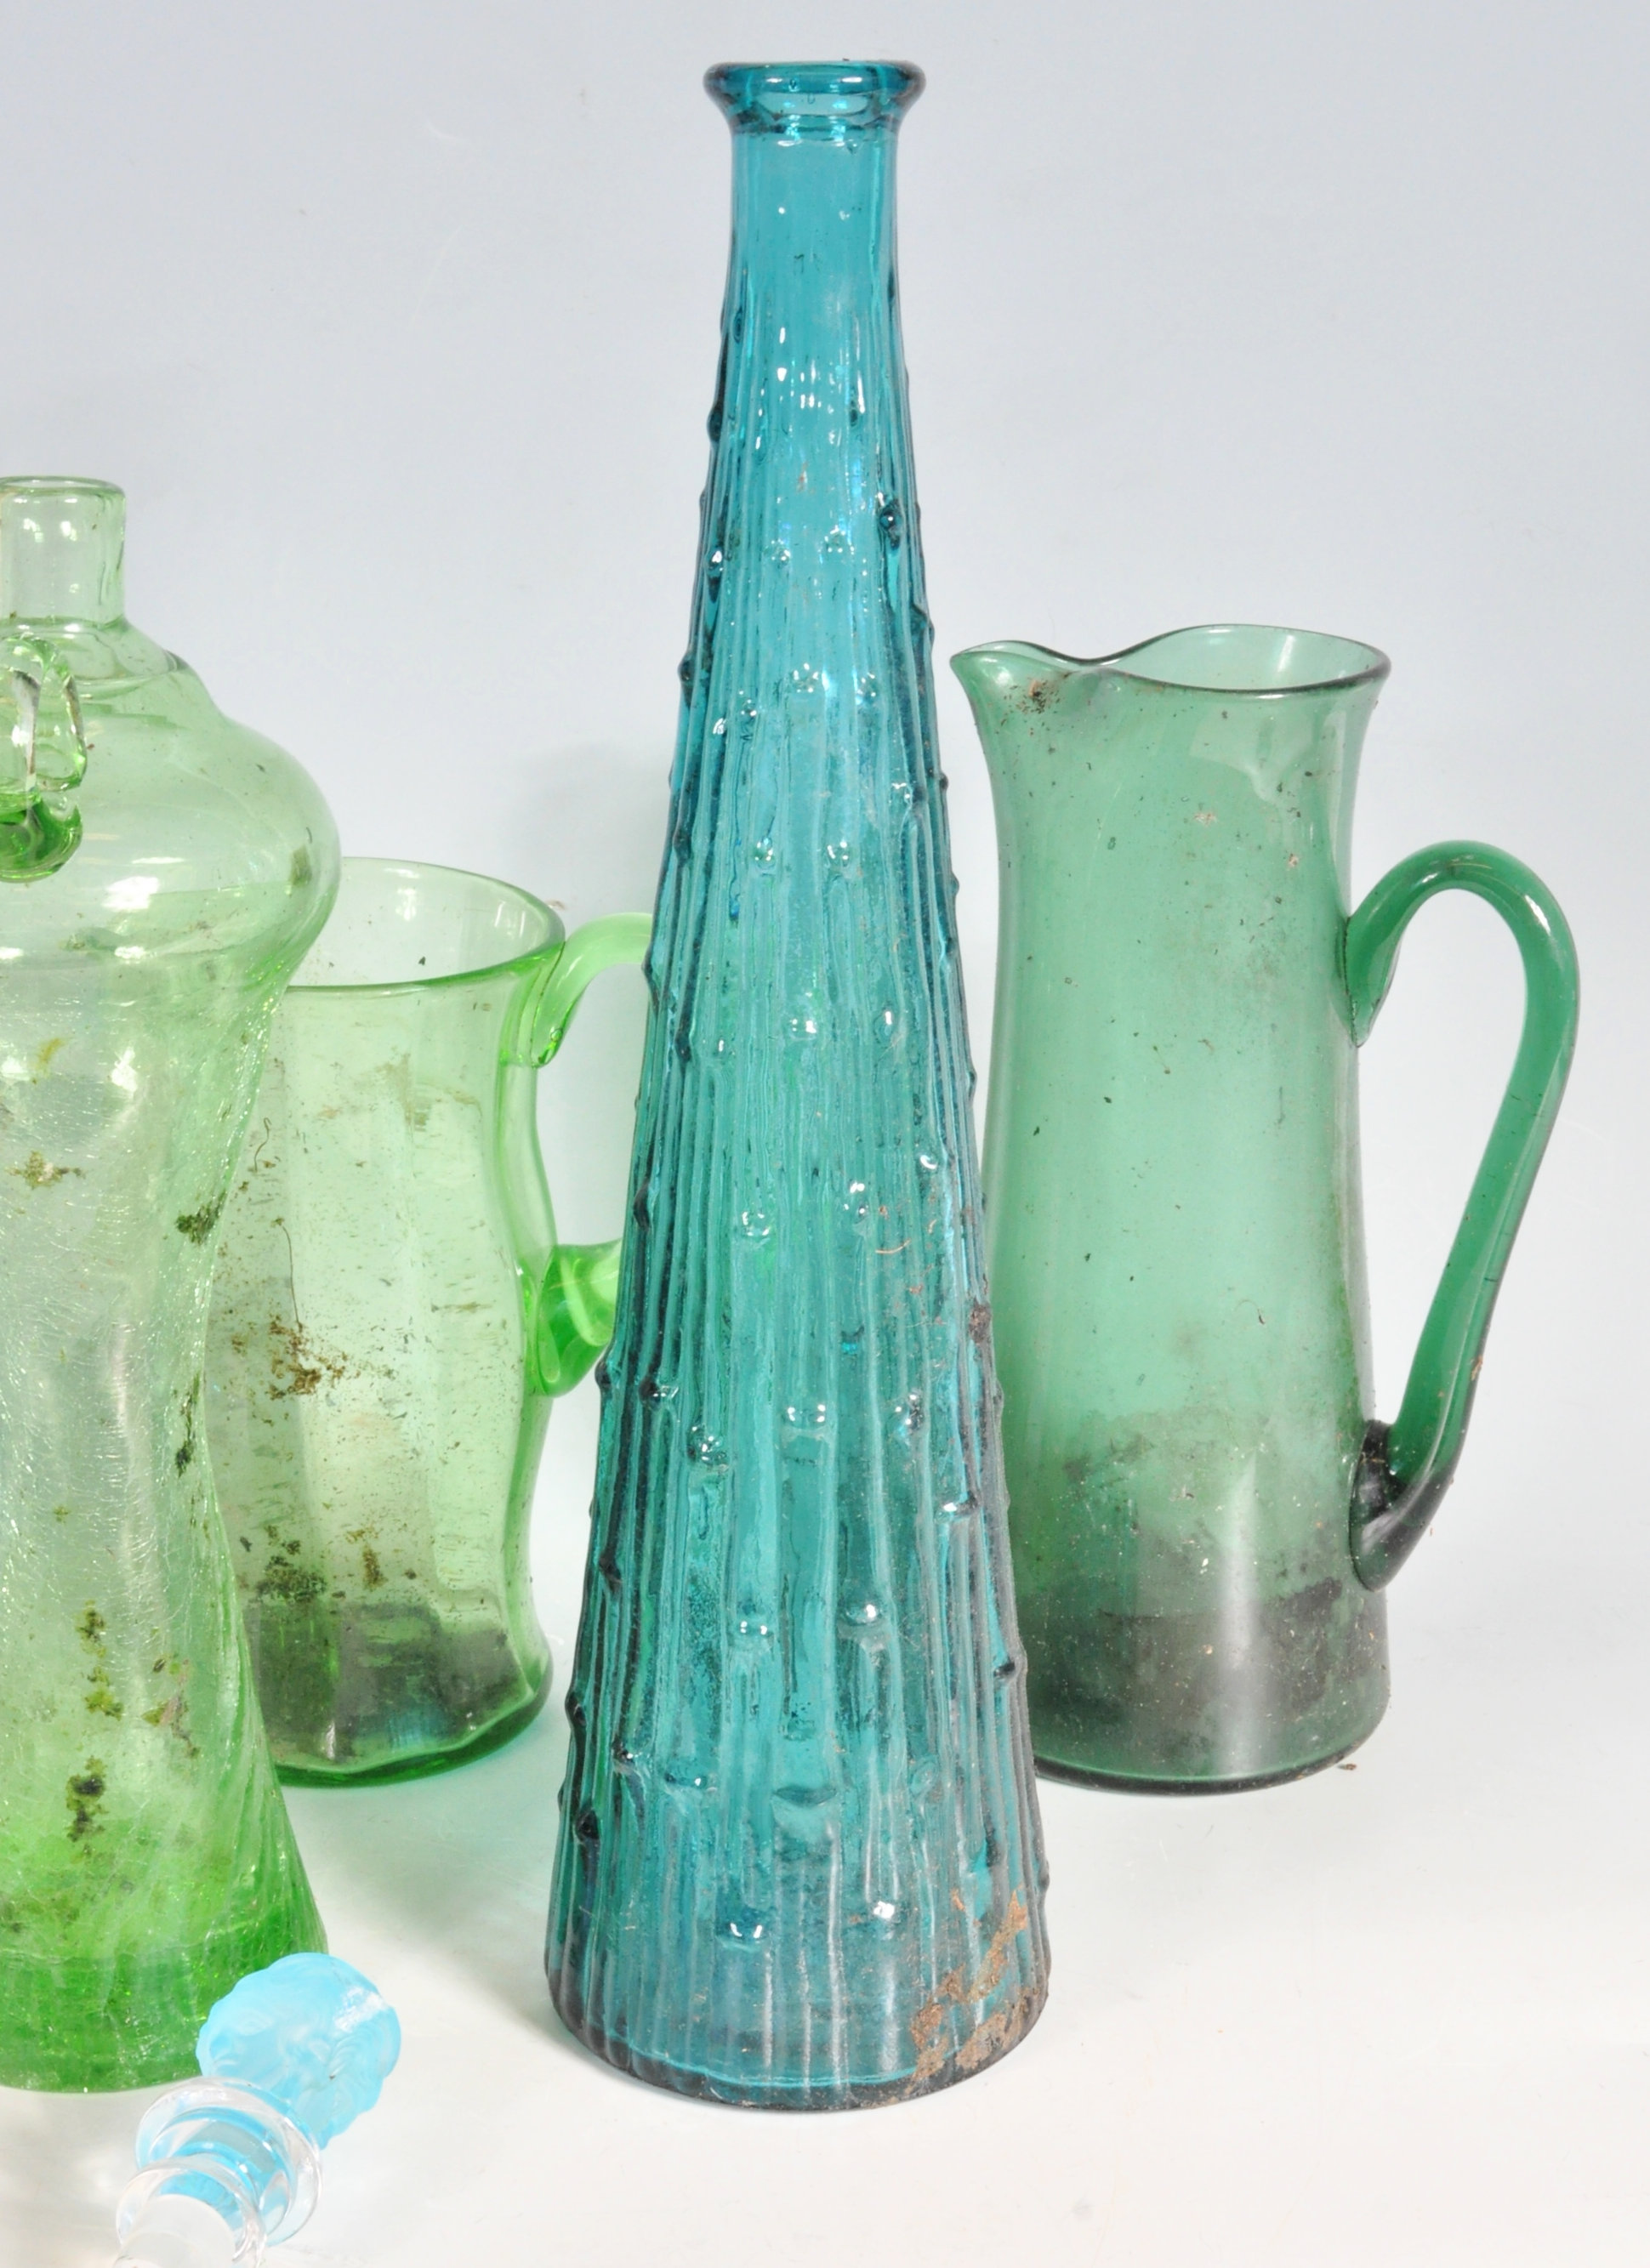 MIXED GROUP OF VINTAGE RETRO STUDIO ART GLASS PIECES - Image 3 of 8